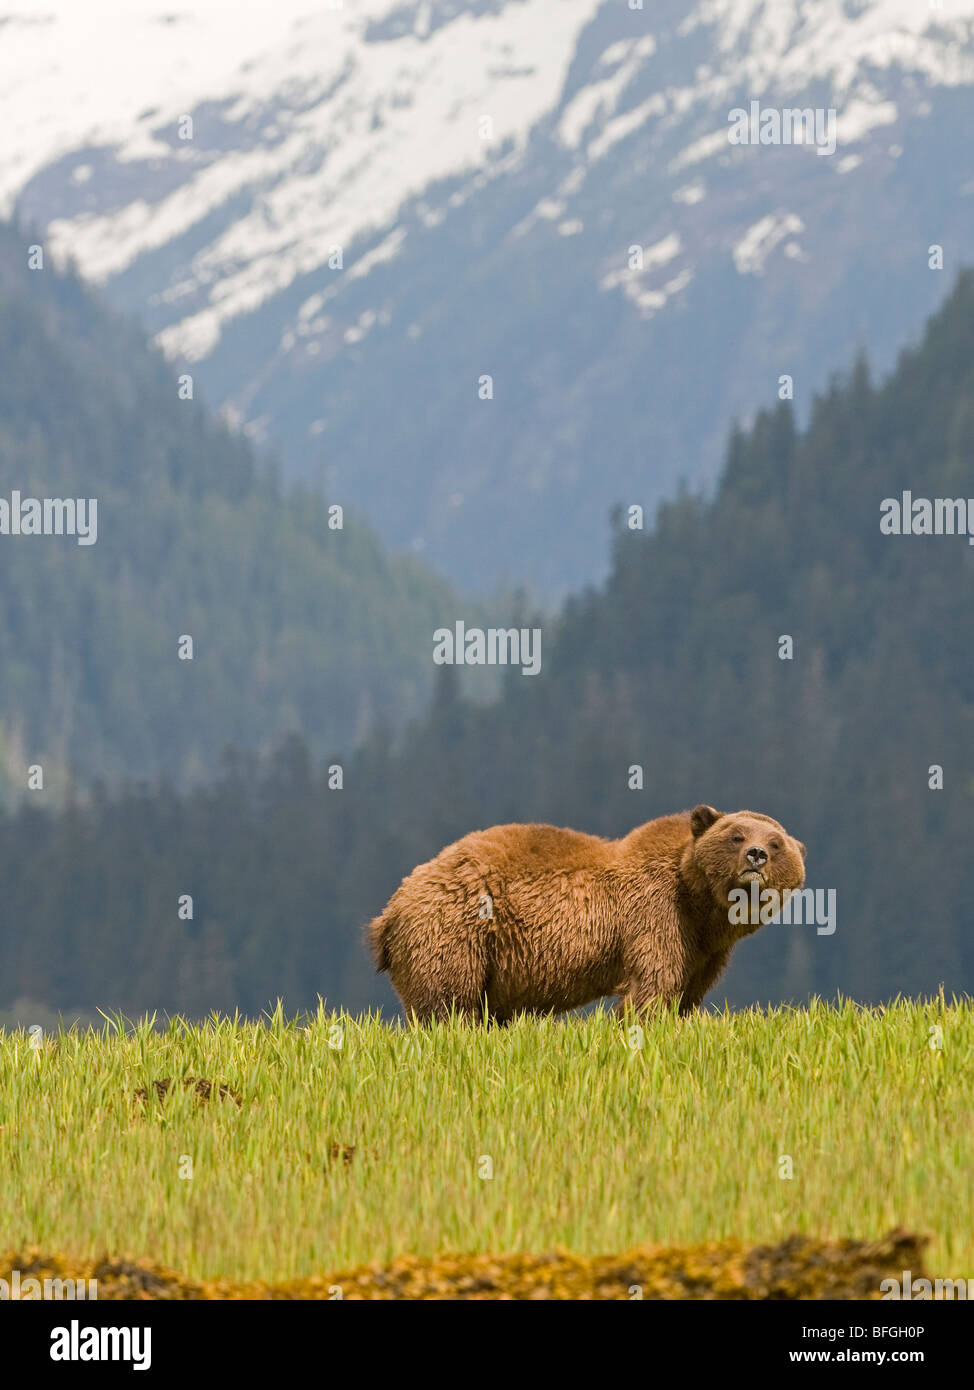 Male Grizzly Bear (Ursus arctos horribilis)  Khutzeymateen Grizzly Bear Sanctuary North of Prince Rupert British Columbia Canada Stock Photo